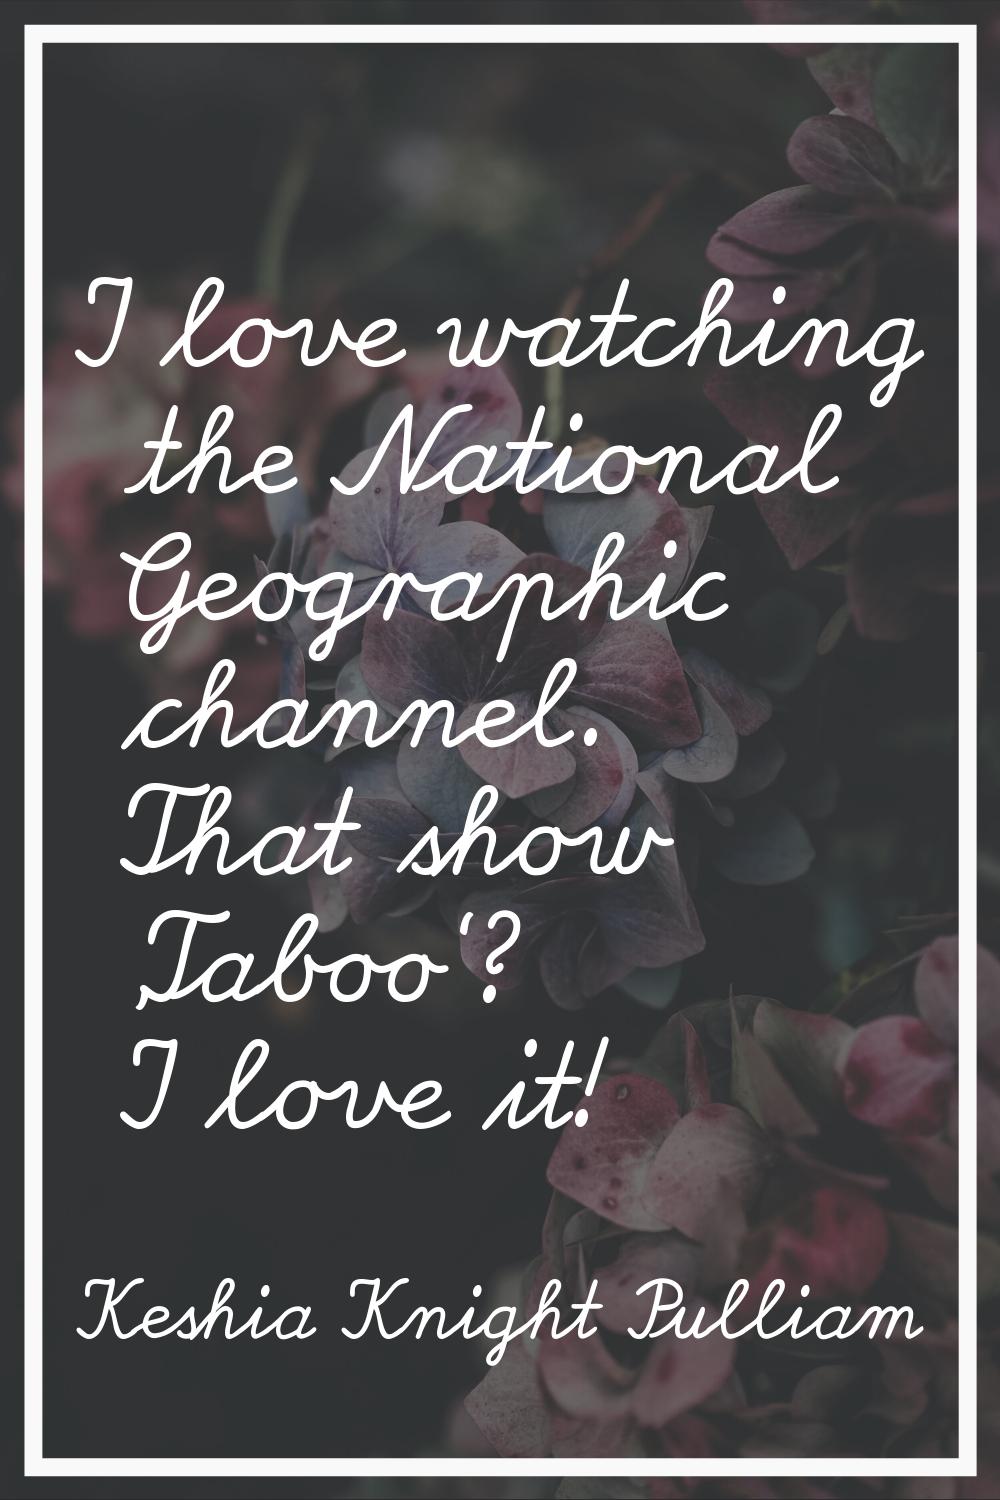 I love watching the National Geographic channel. That show 'Taboo'? I love it!